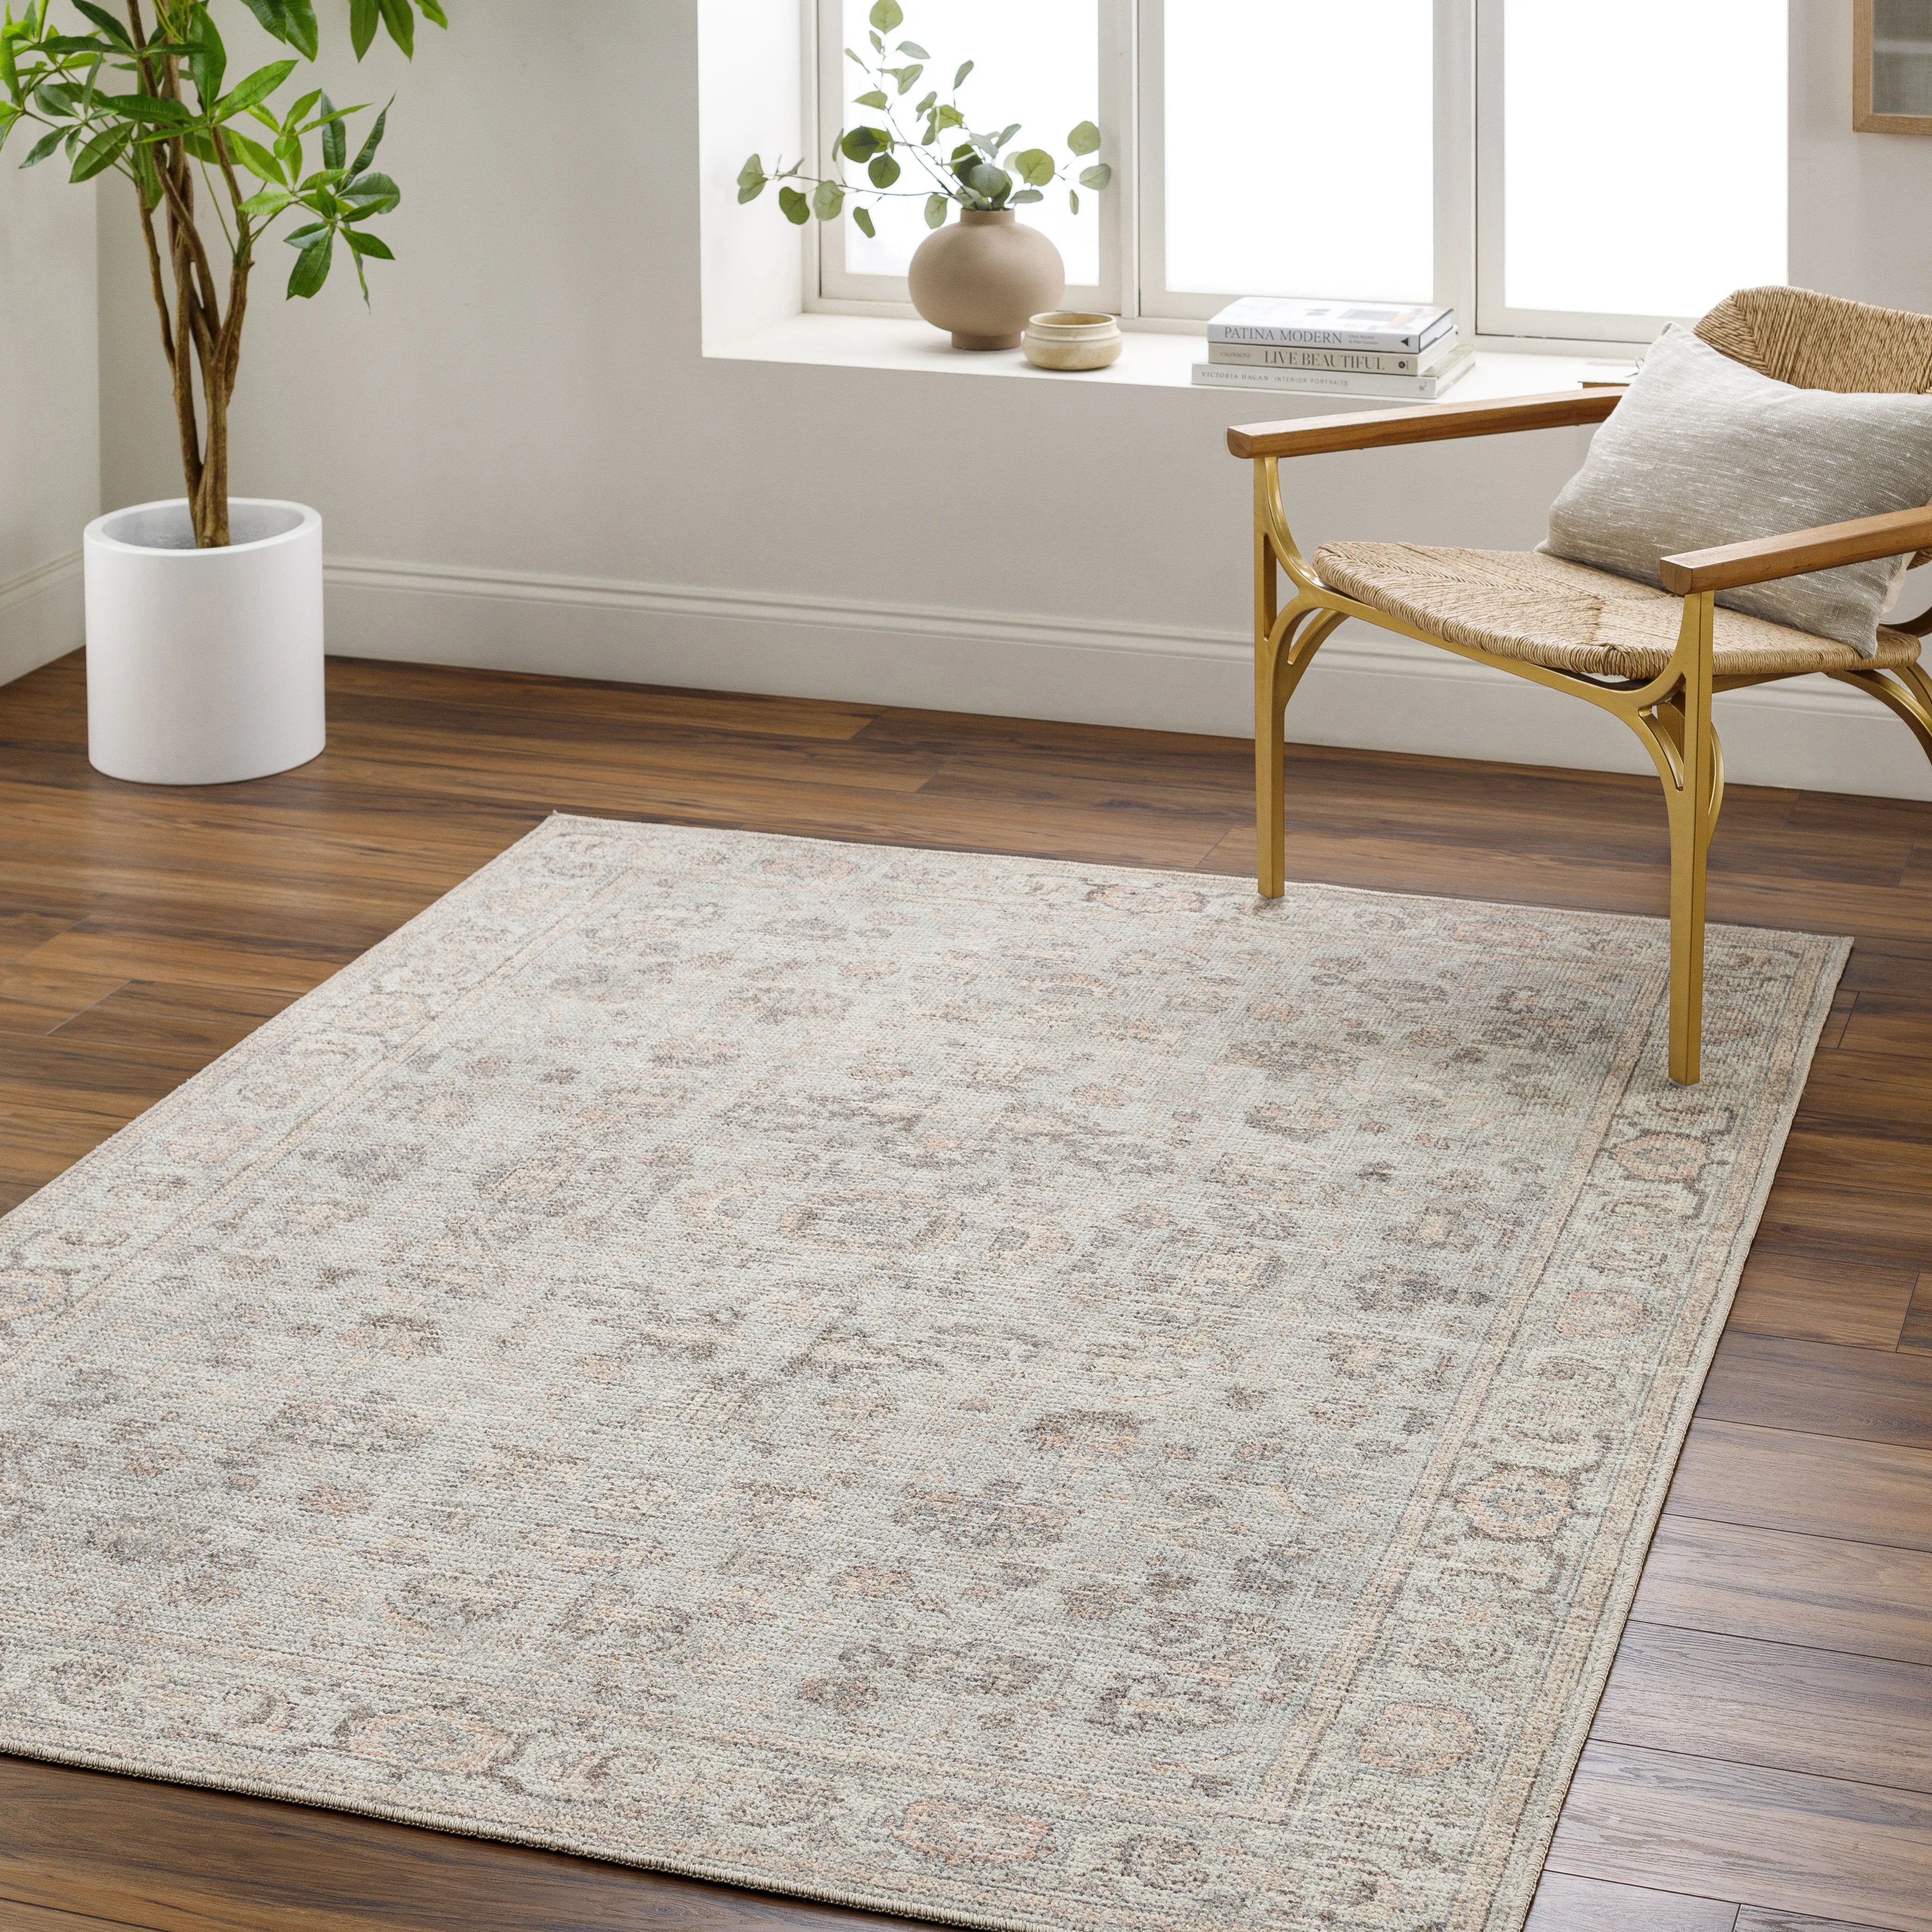 PNW Home x Surya available at Amethyst Home shipping to Australia, UK, and Canada. Organic modern design with easy to clean rugs for a family home in  the Kansas City metro area.